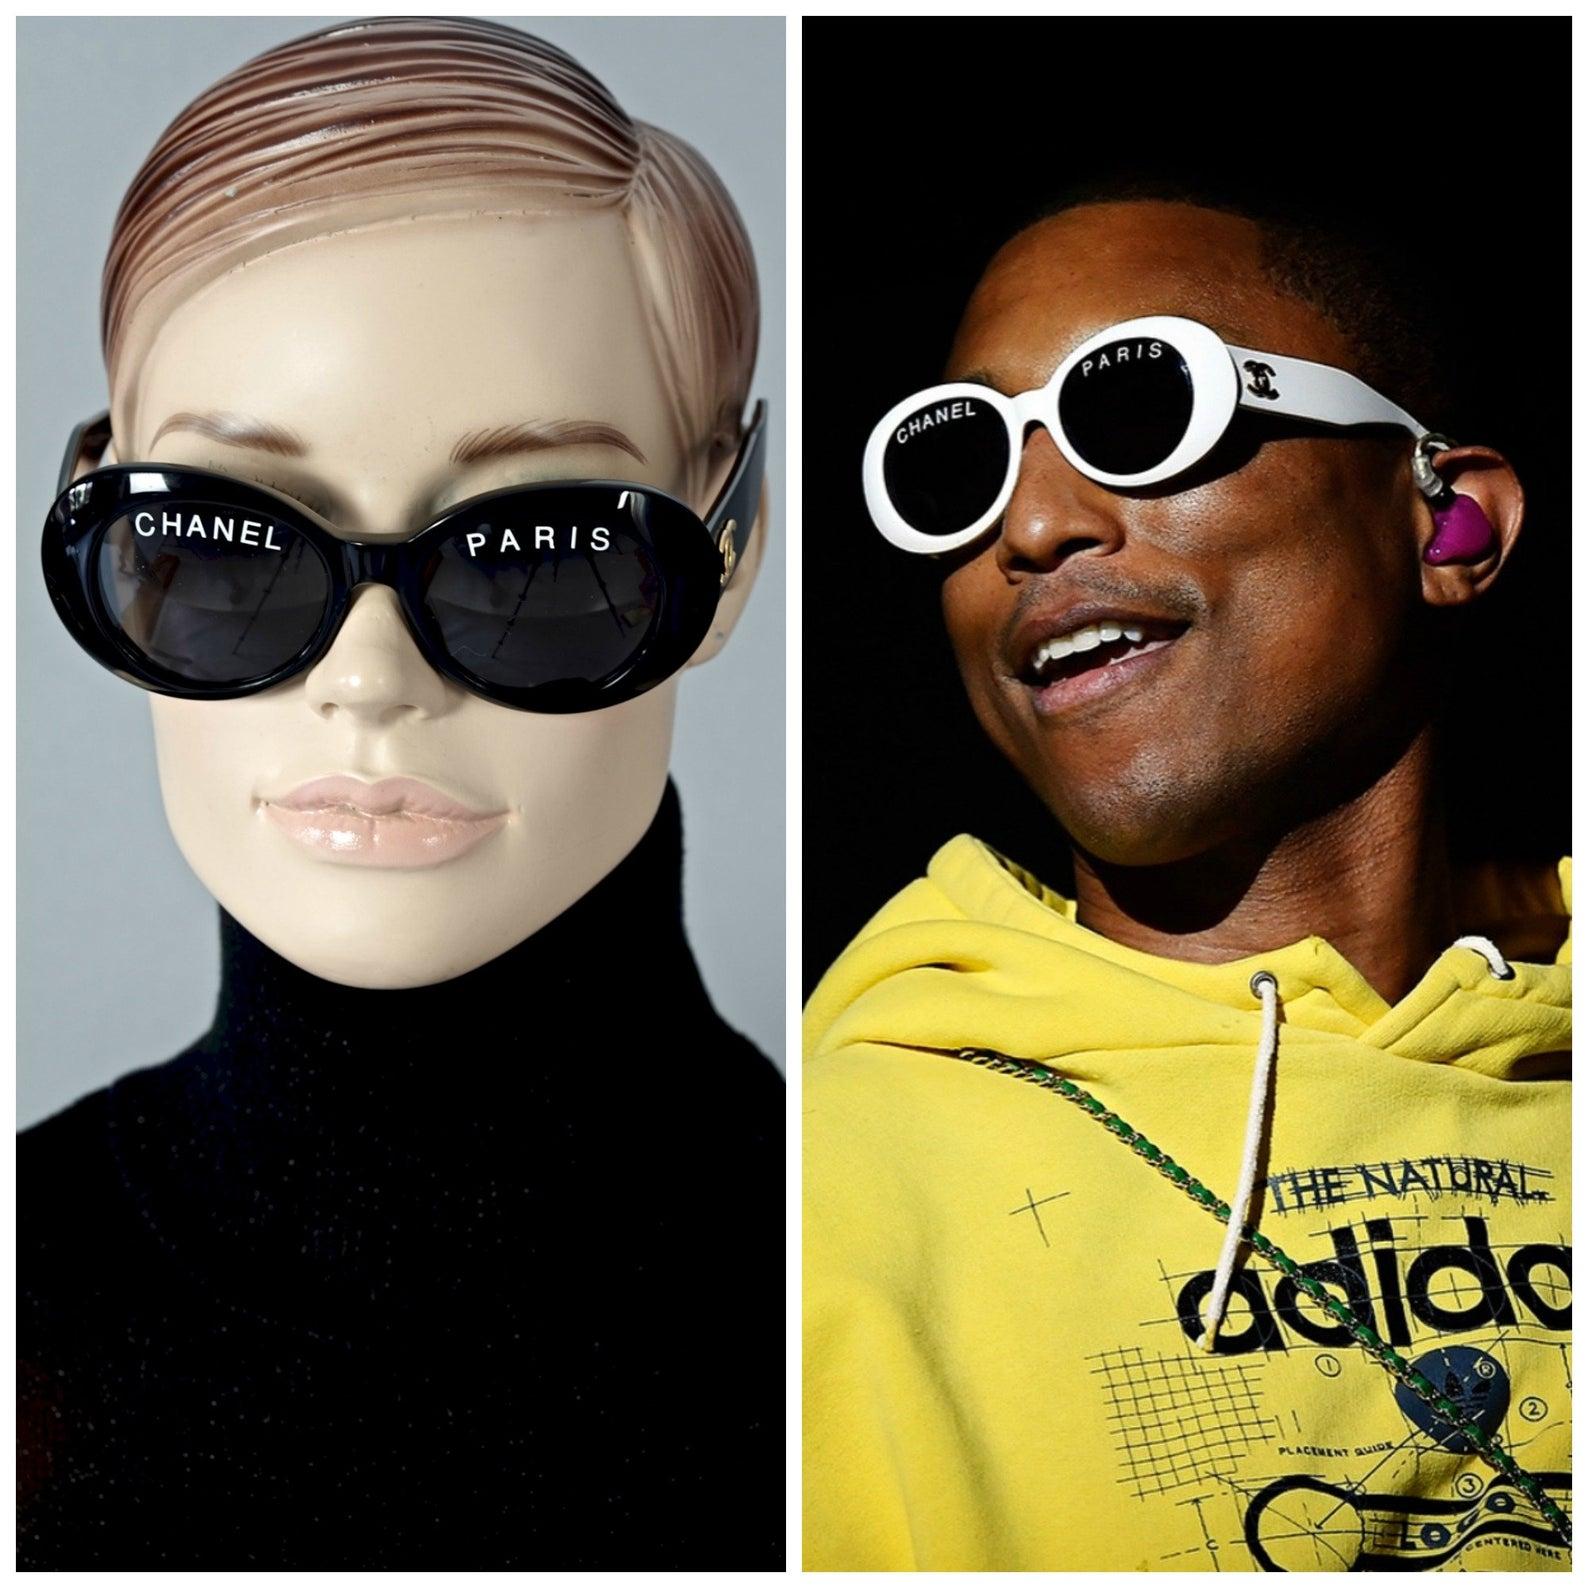 Vintage 1993 Iconic CHANEL PARIS Spelled Black Sunglasses

Measurements:
Height: 2.12 inches (5.4 cm)
Frame Width: 5.51 inches (14 cm)
Temples: 5.11 inches (13 cm)

As seen on Pharrell Williams.
From CHANEL Spring/ Summer 1993